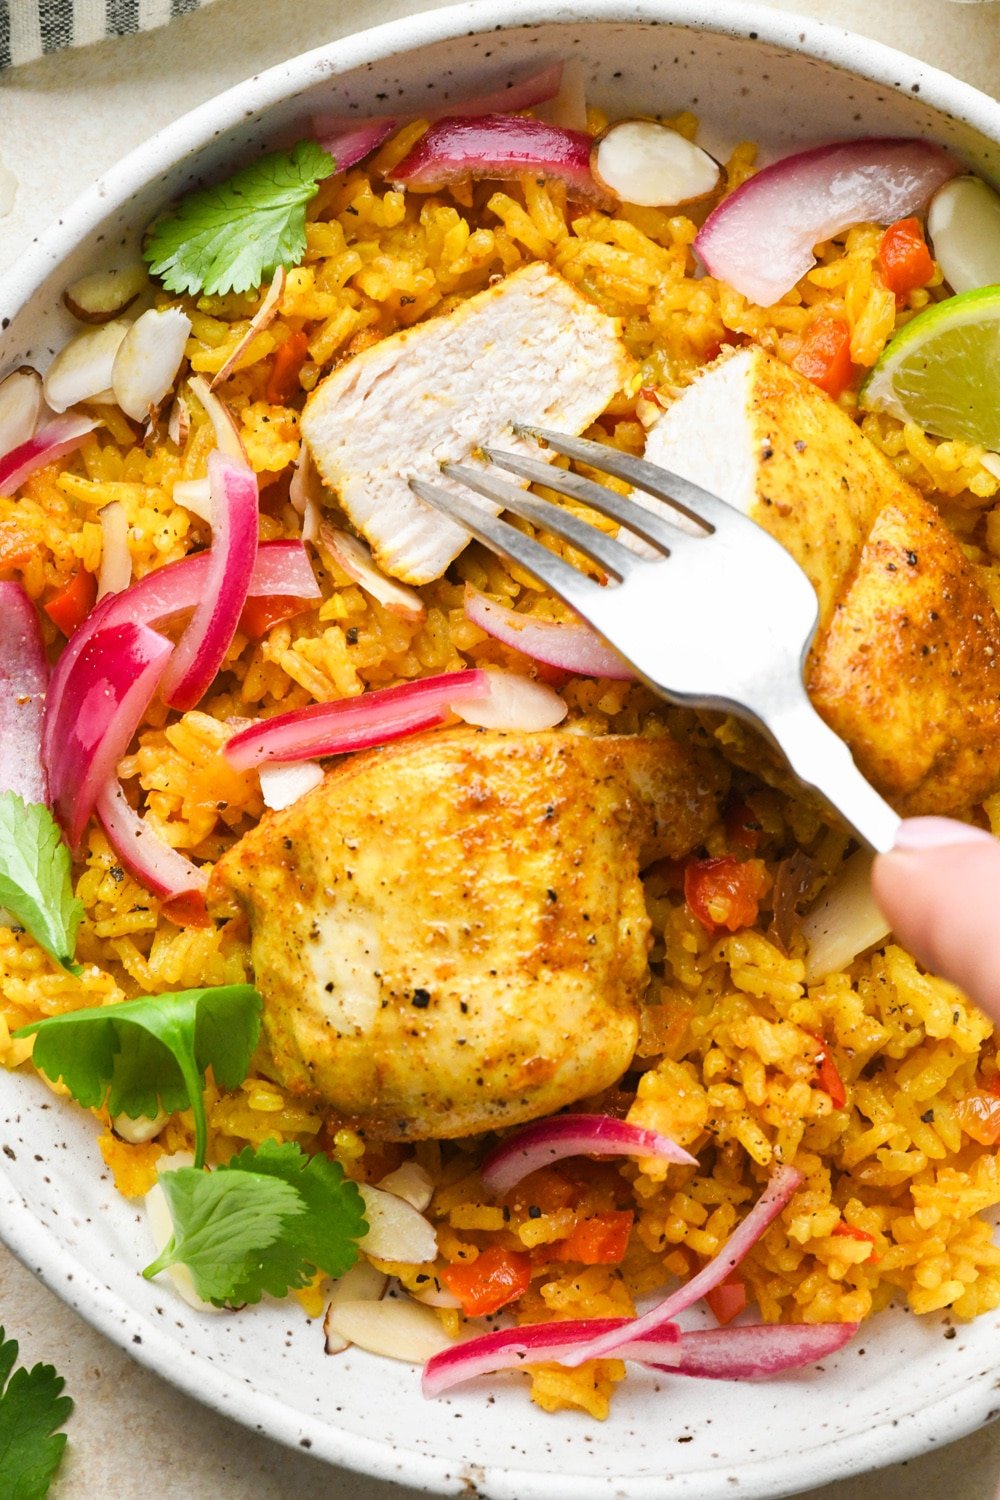 A single serving of vibrantly colored baked curry chicken and rice in a shallow speckled bowl topped with pink pickled red onions, cilantro, sliced almonds, and a lime wedge. A fork is piercing a cut bite of the chicken breast.